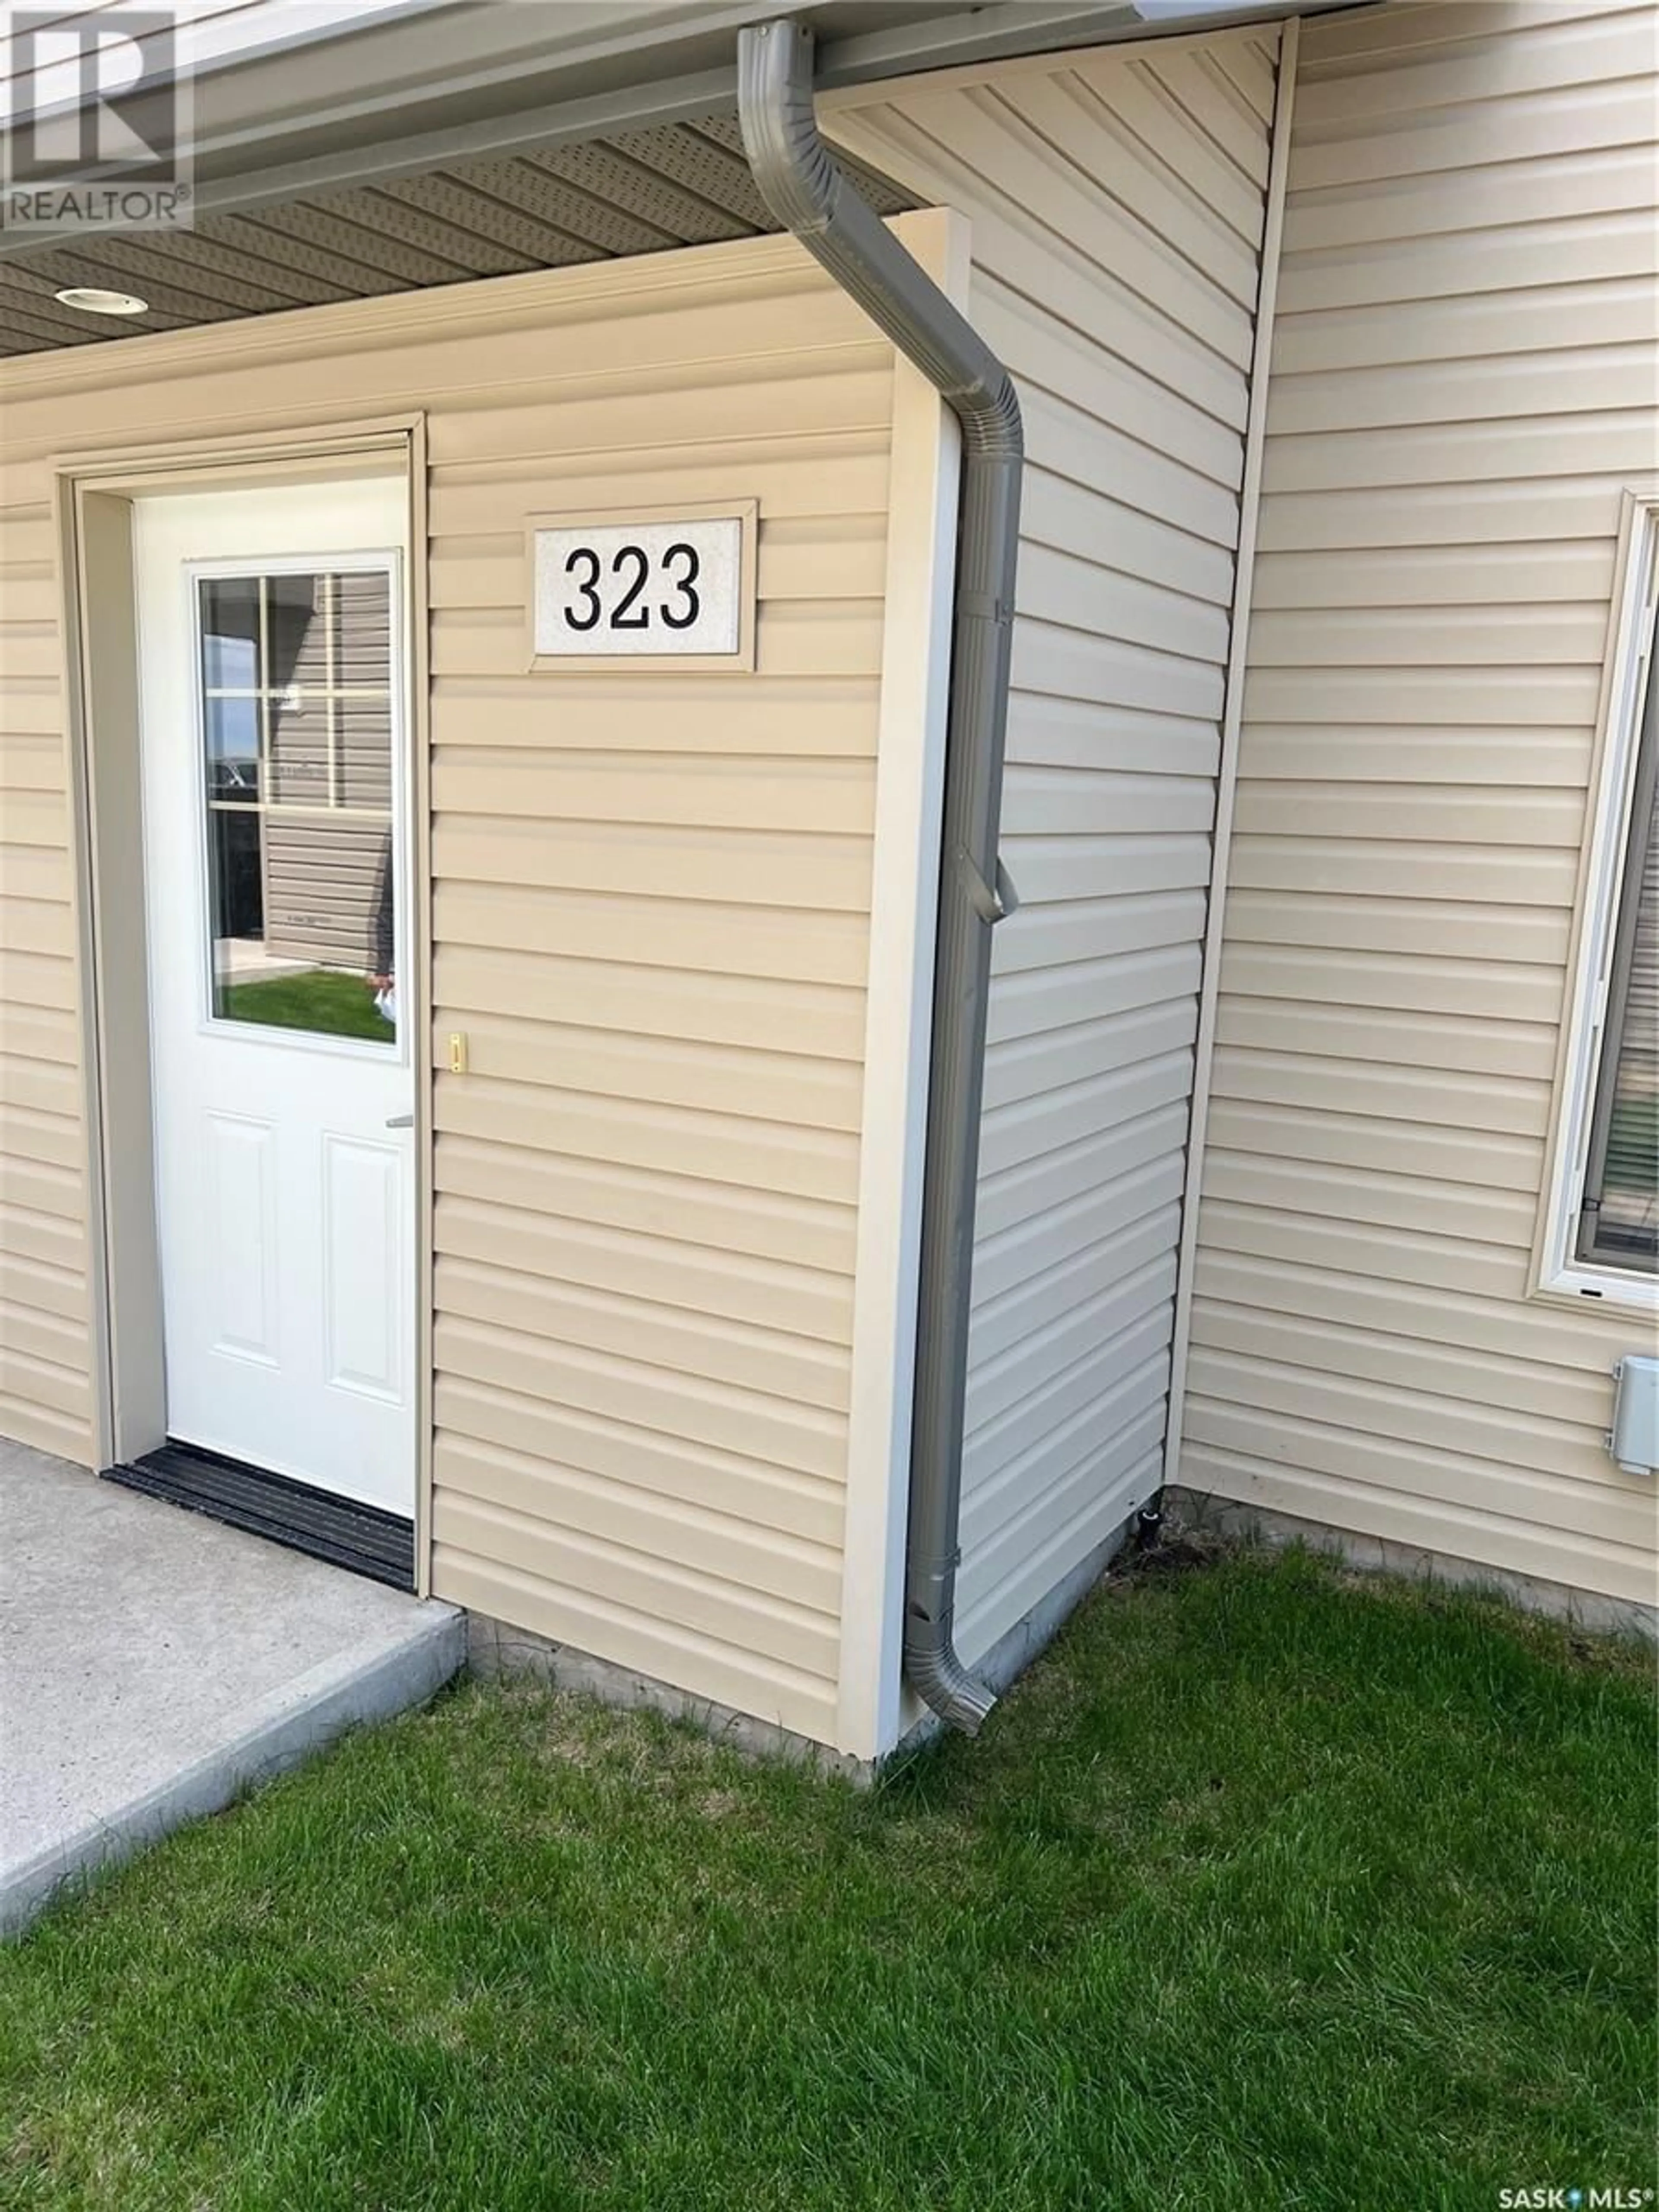 A pic from exterior of the house or condo for 323 700 BATTLEFORD TRAIL, Swift Current Saskatchewan S9H4V9